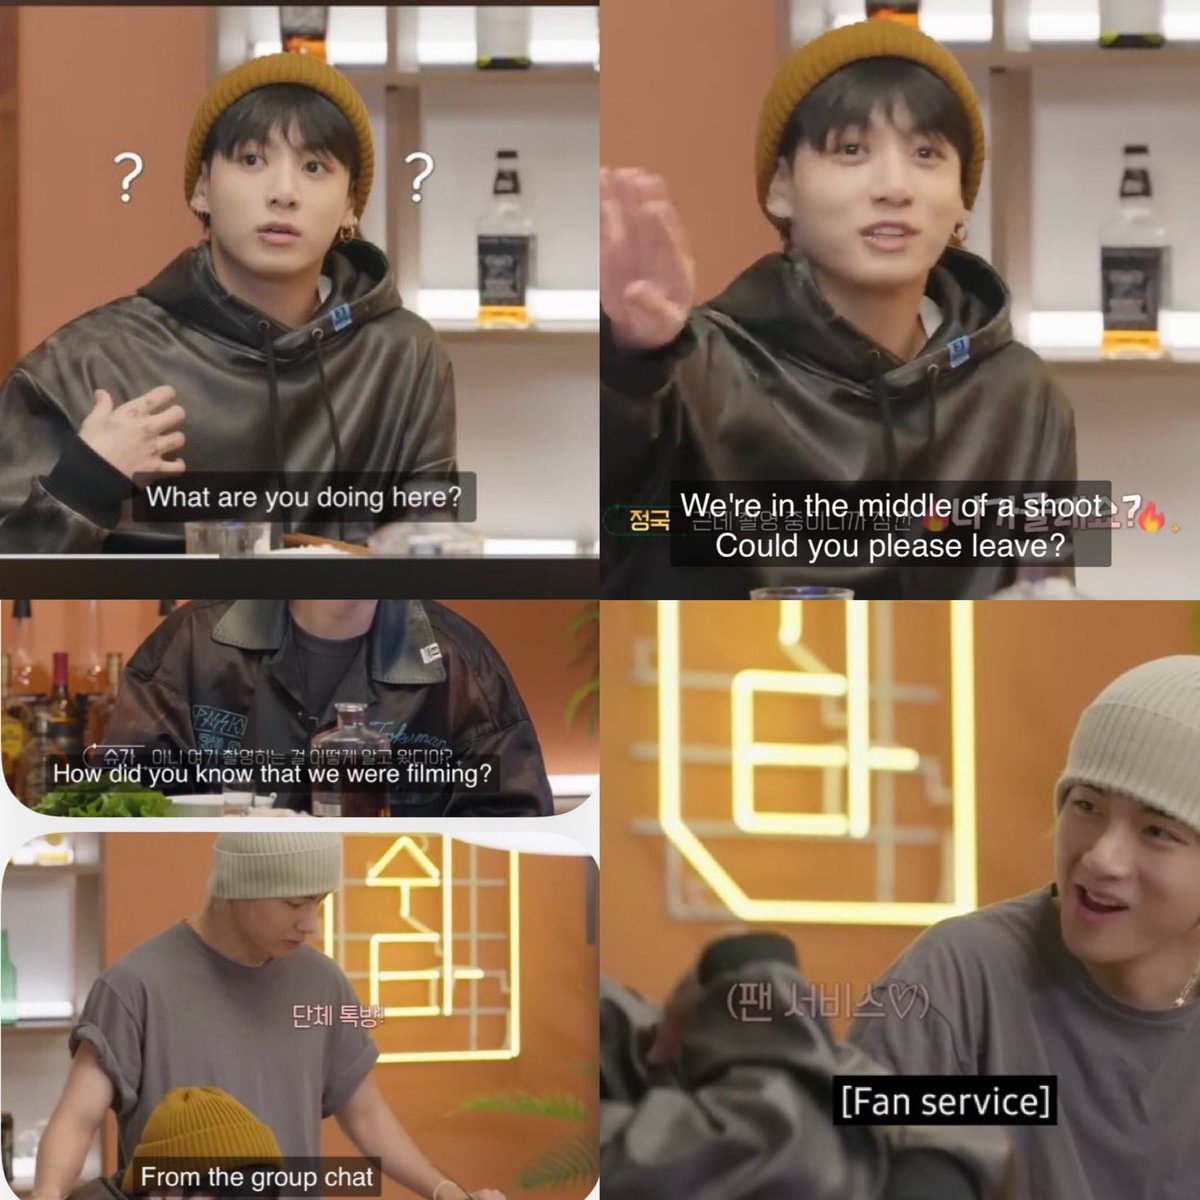 This has to be the funniest sh!t ever, if they was a couple why 🐻 found out the shoot from group chat and not his bf? If 🐰 is so close to 🐻 why he say “what are you doing here?”😂😂 and look what the staff said, “FAN SERVICE” 😂😂😂 they even know the truth😂😂